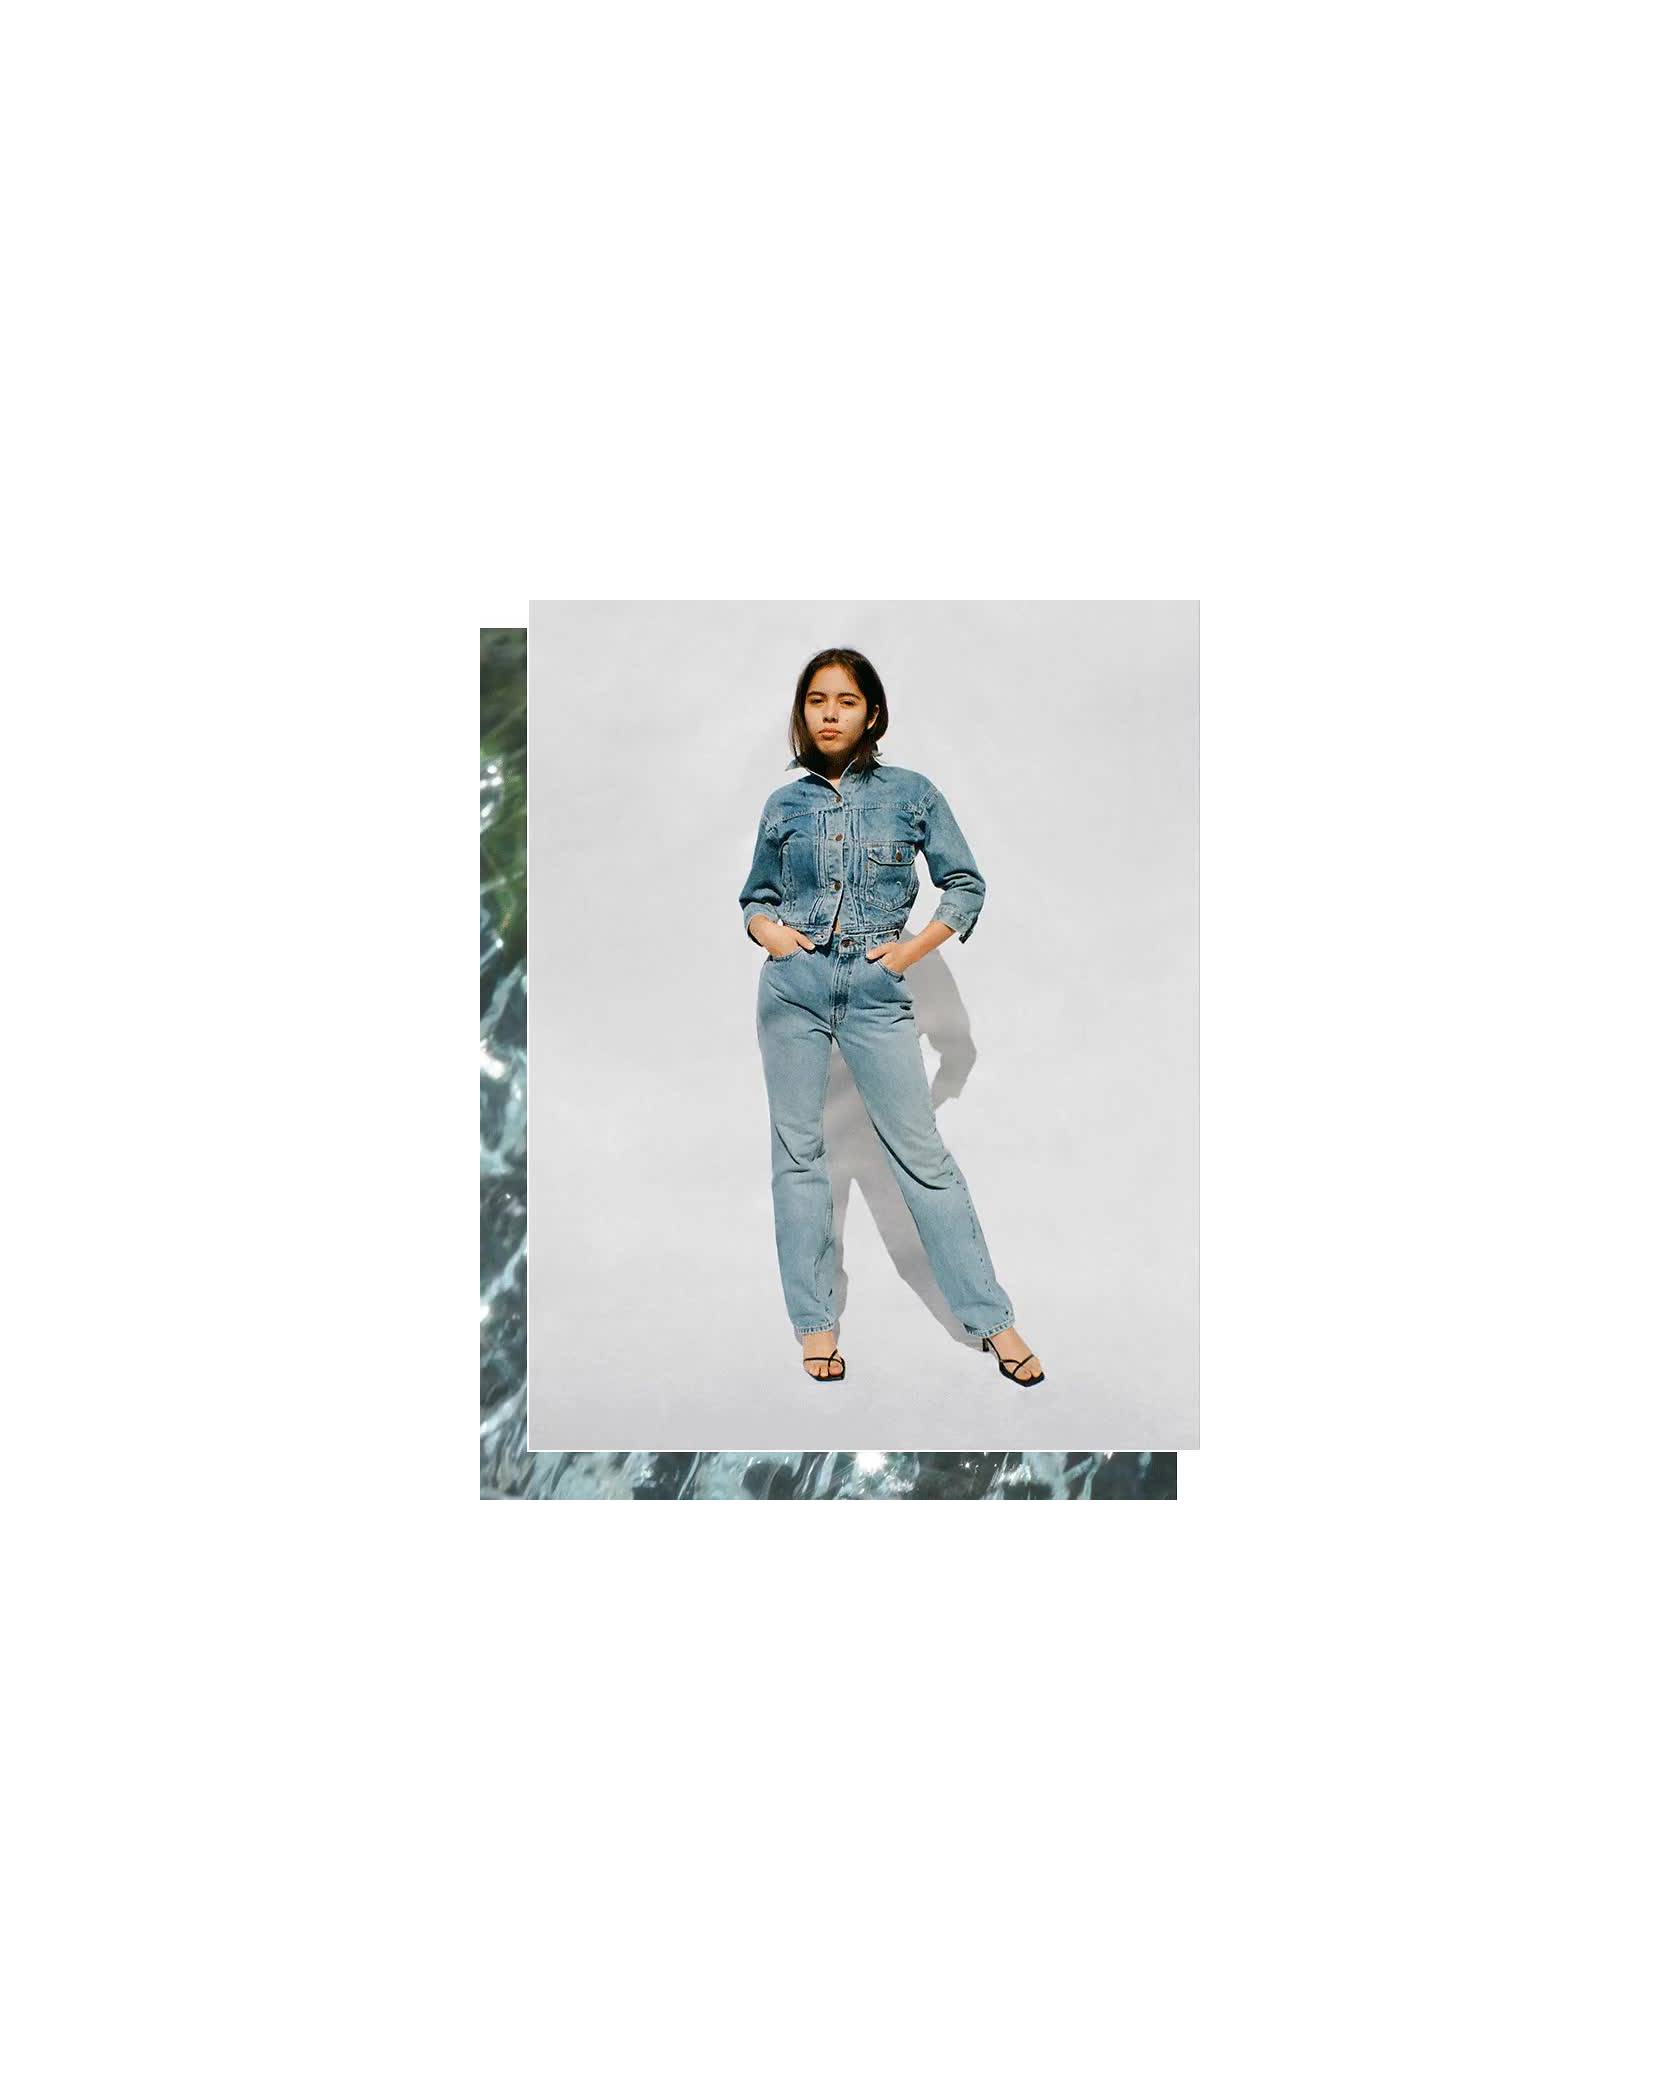 GIF of Xiye Bastida. She is standing against a white backdrop and is wearing a Levi's Trucker Jacket and jeans with black heels.